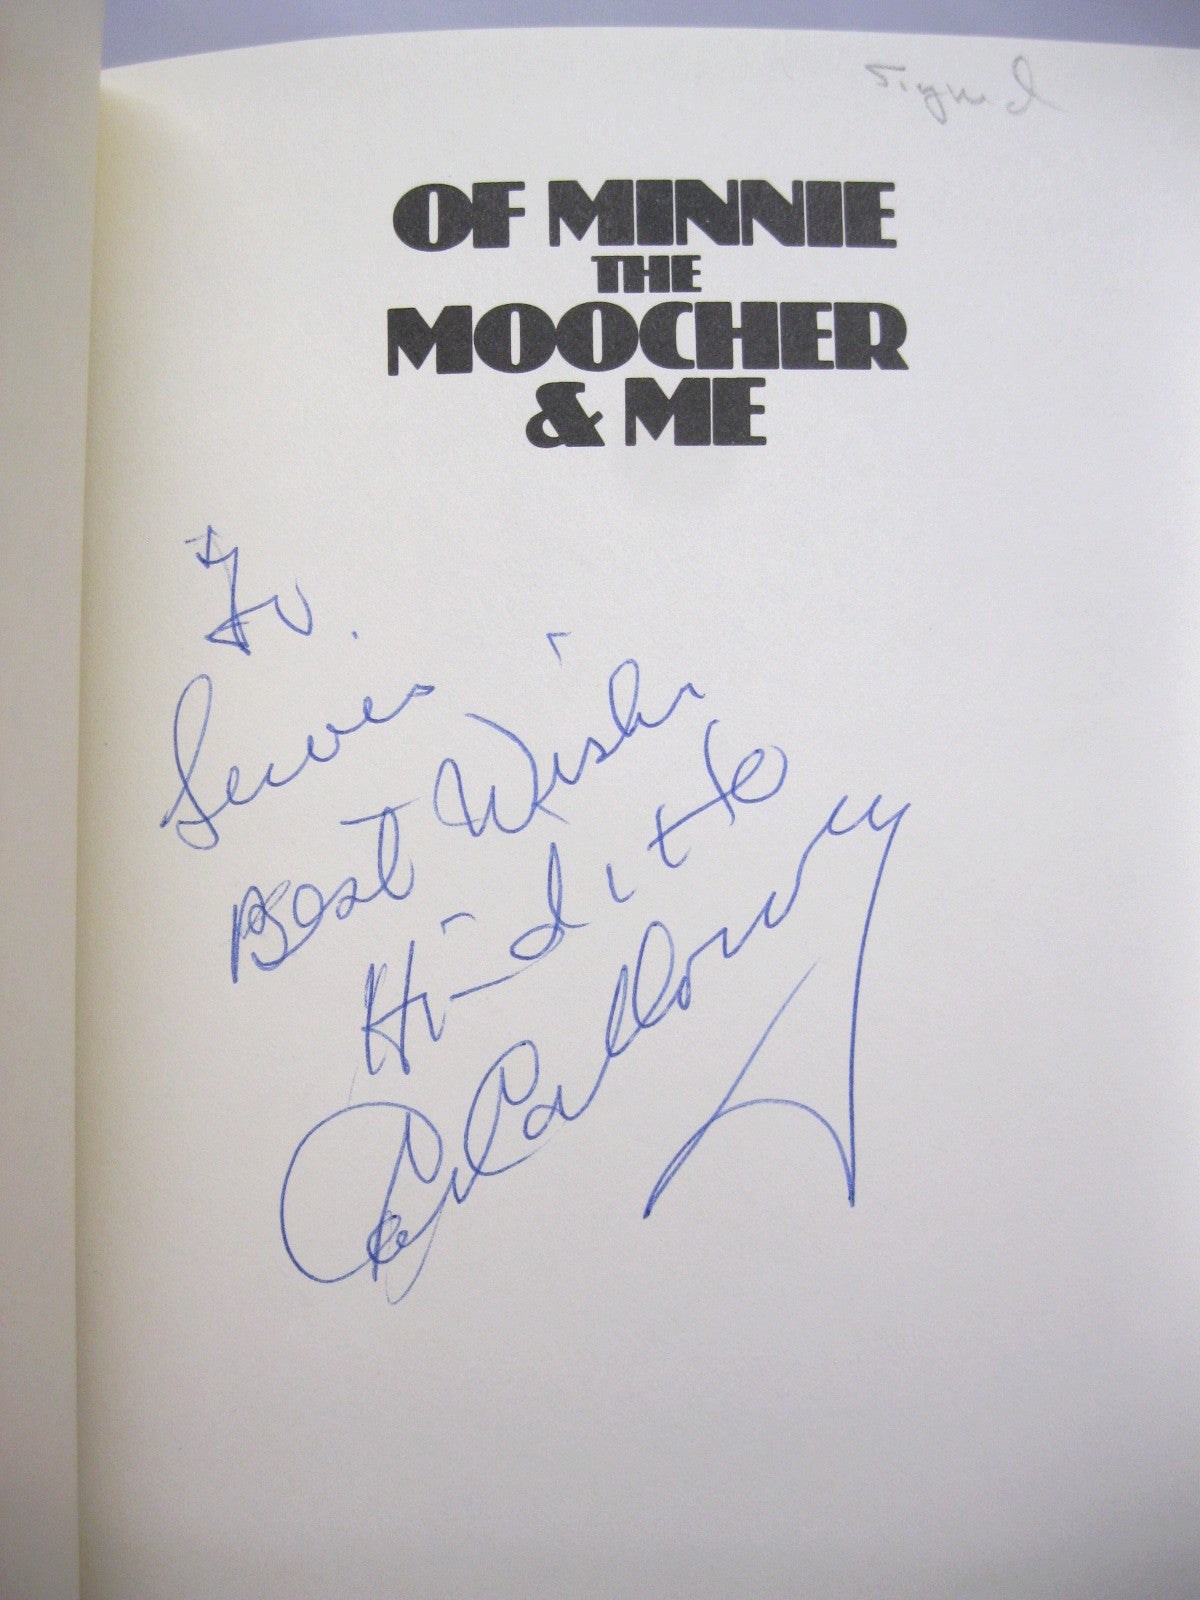 Of Minnie The Moocher & Me SIGNED by Cab Calloway and Bryant Rollins